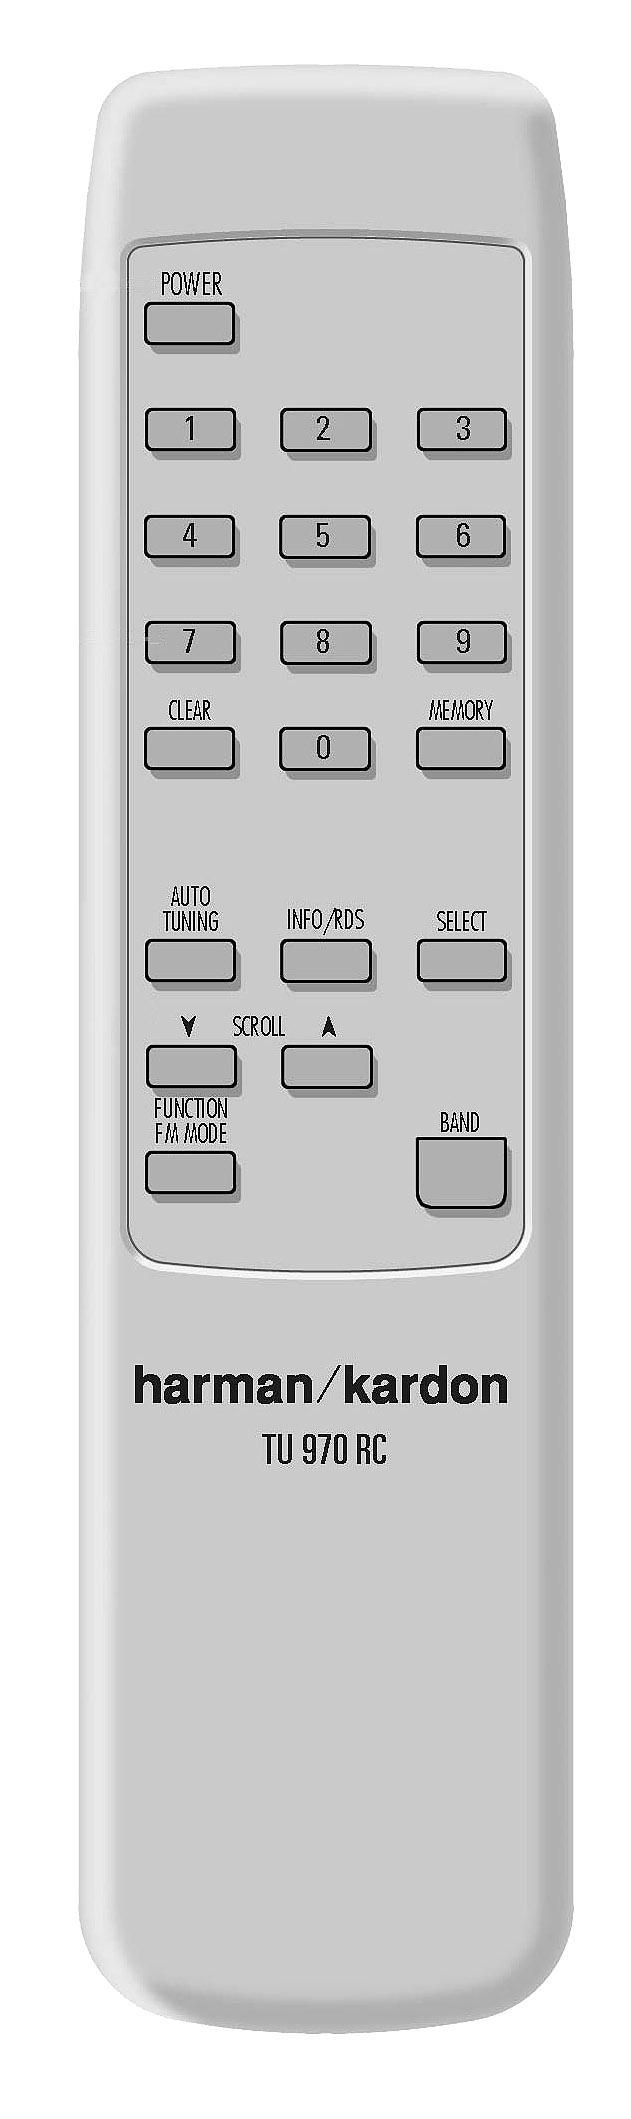 Remote Control Functions 0 Standby/Power On: Press this button to turn on the TU 970; press it again to turn the unit off (to Standby).